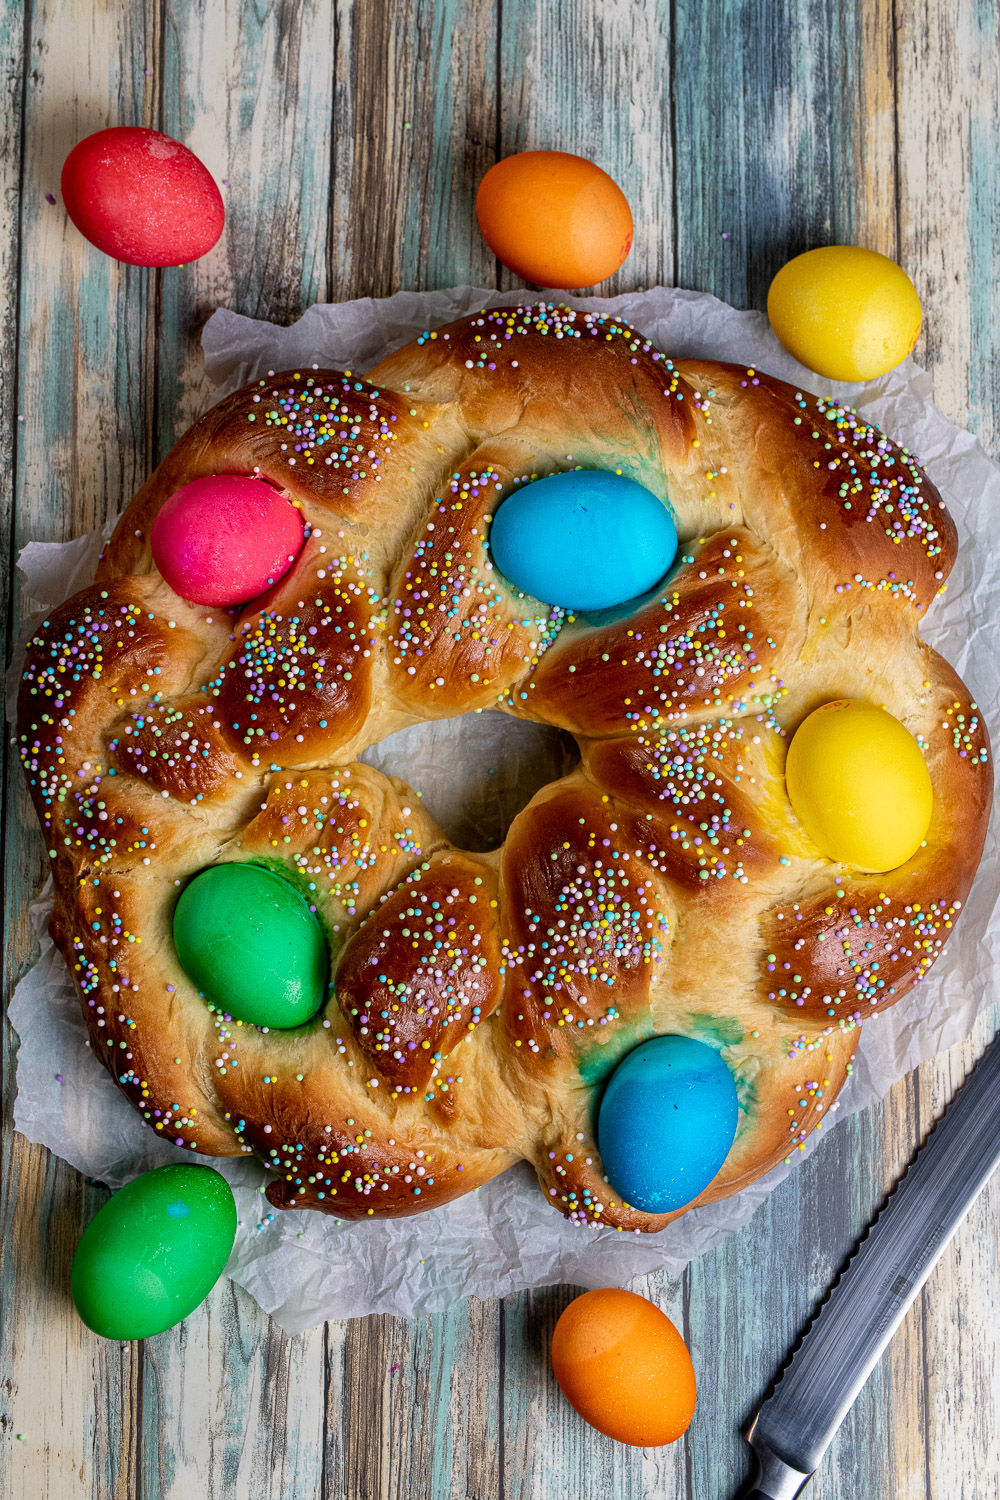 Overhead view of braided Italian Easter bread with dyed eggs and sprinkles